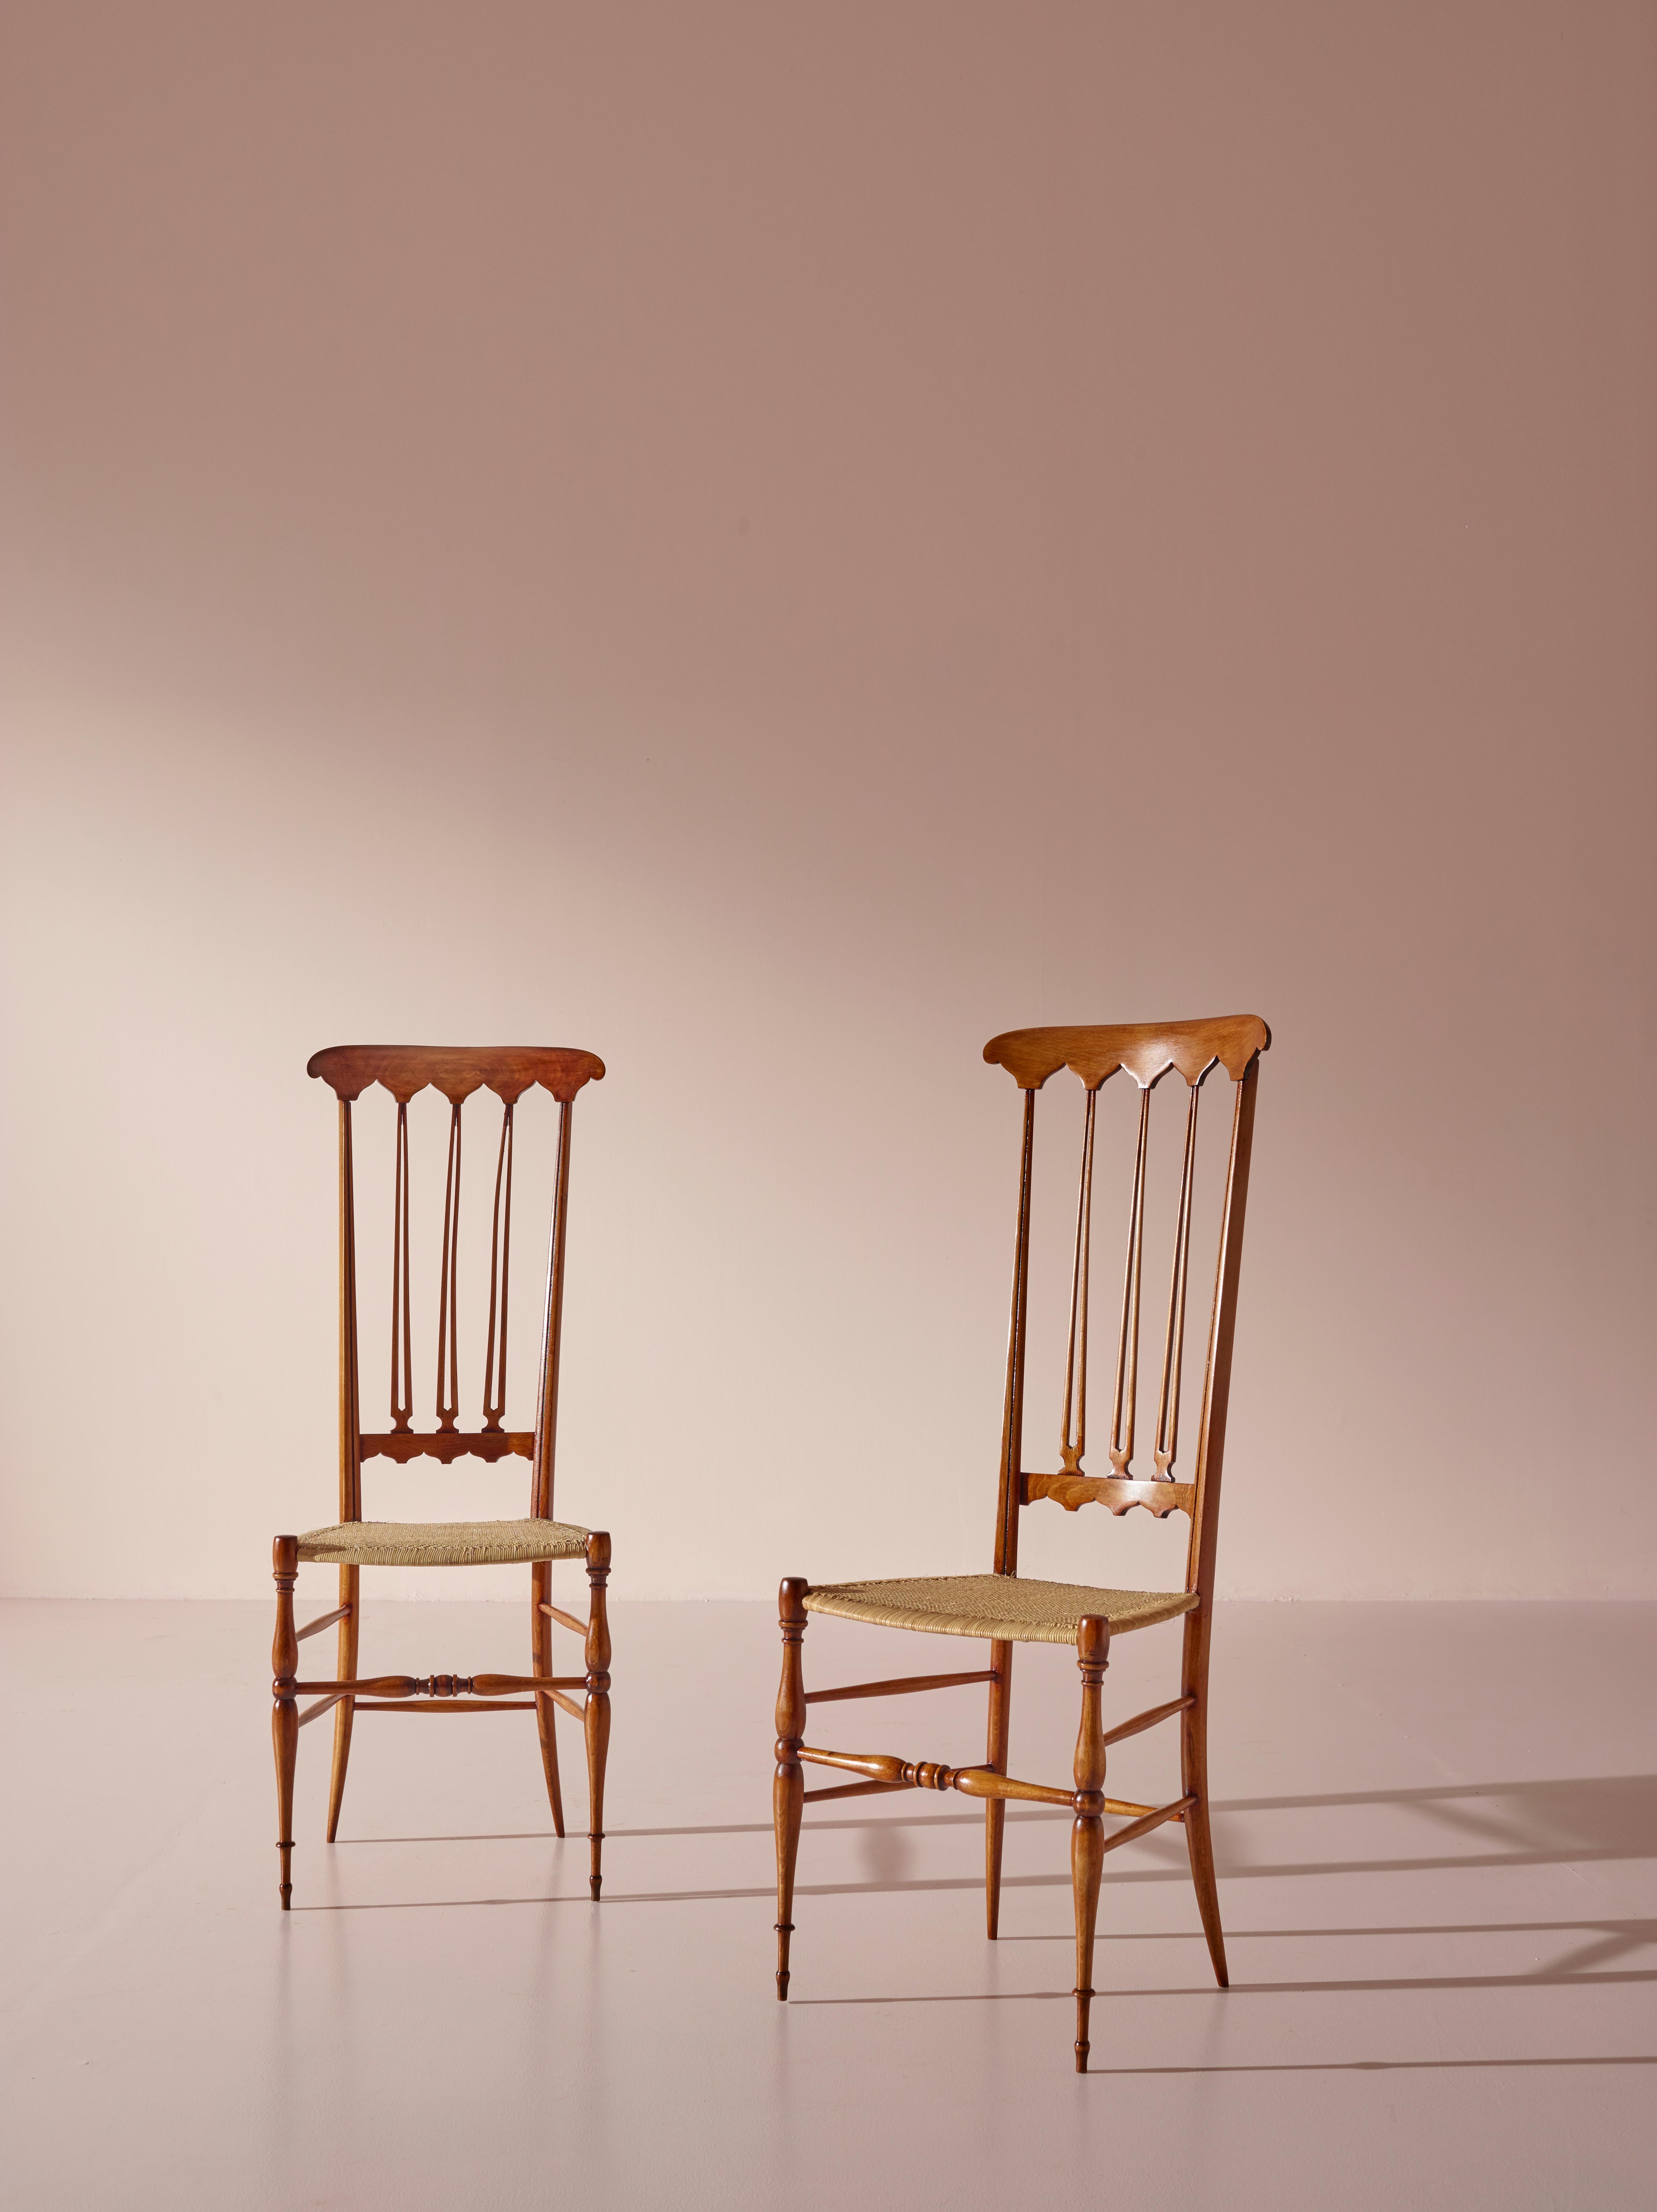 Mid-20th Century Pair of Cane and Beech ''Spade'' High Back Chairs Made in Chiavari, Italy 1960s